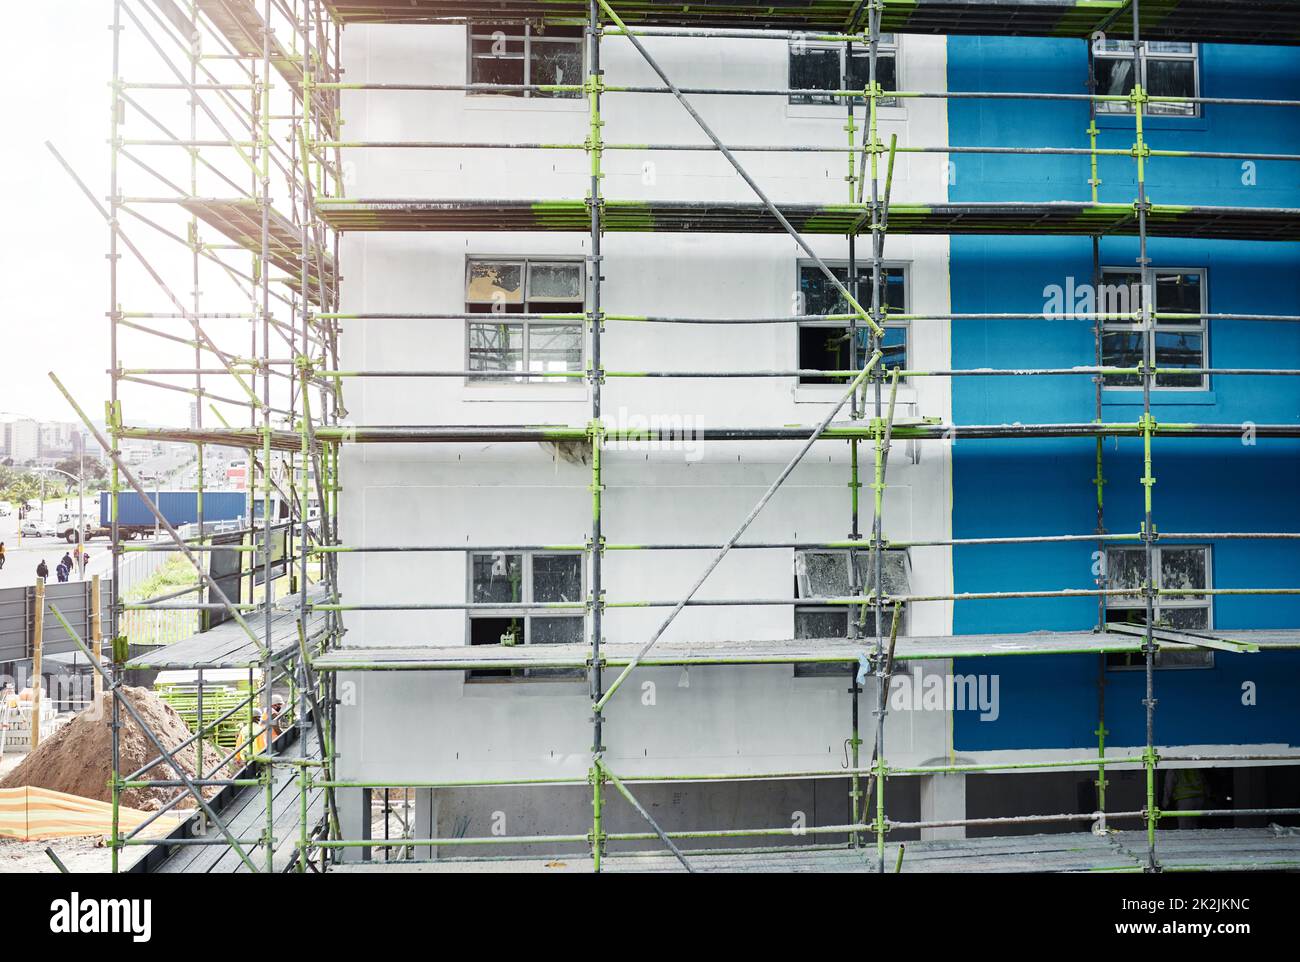 The demand for urban accommodation is on the rise. Shot of scaffolding and a building at a construction site. Stock Photo